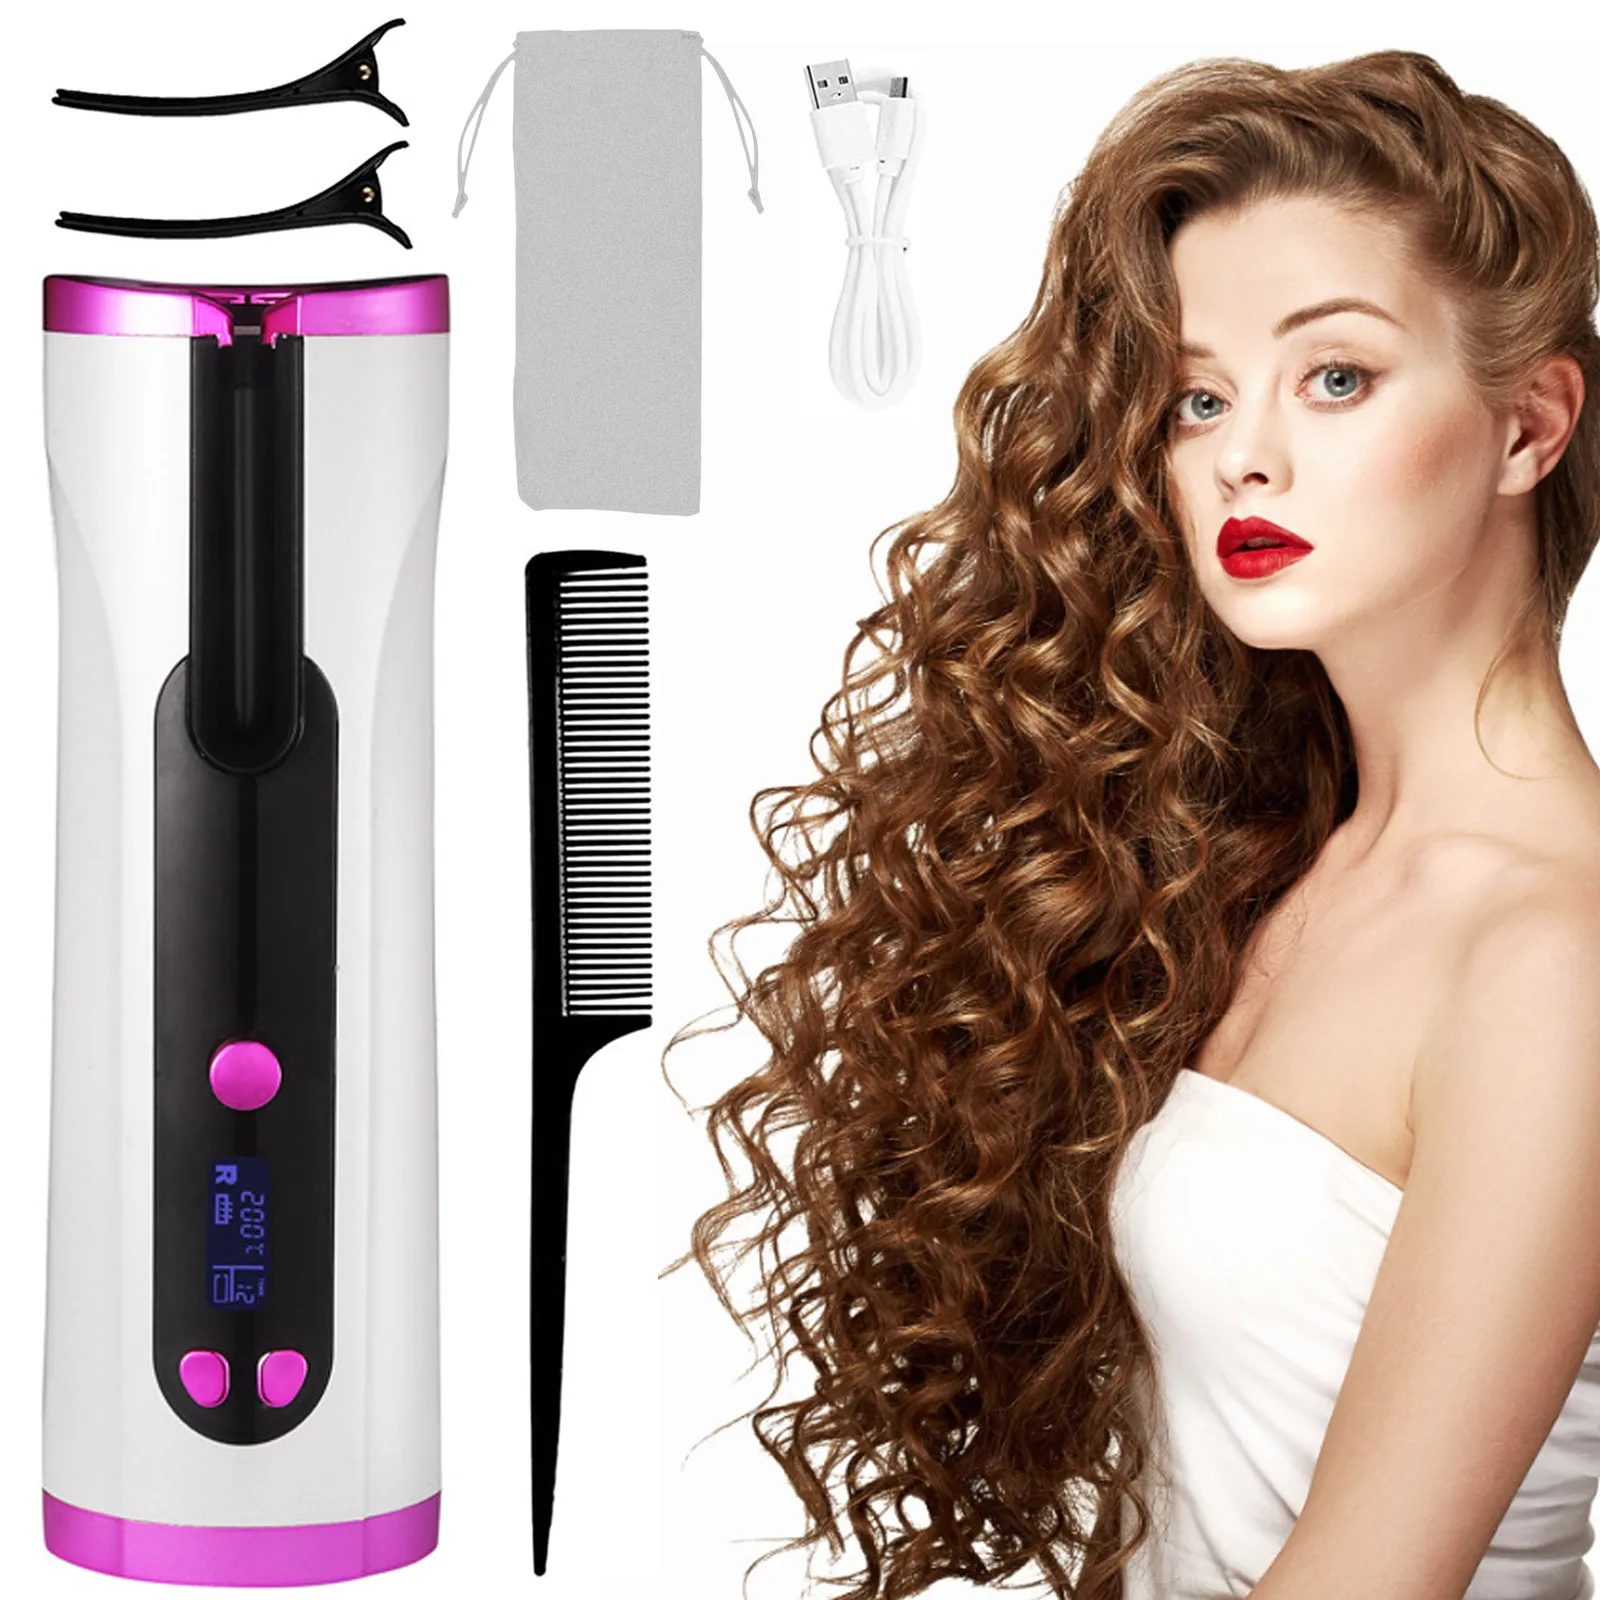 Portable Automatic Curling Iron Wireless Rechargeable Hair Curler Roller Quick Heating Smart Power Off for Wet Dry Hair c trianglelab® 115w high power chc® pro k500 kit ceramic heating core quick heating for ender 3 volcano hotend cr10 mk3s blv